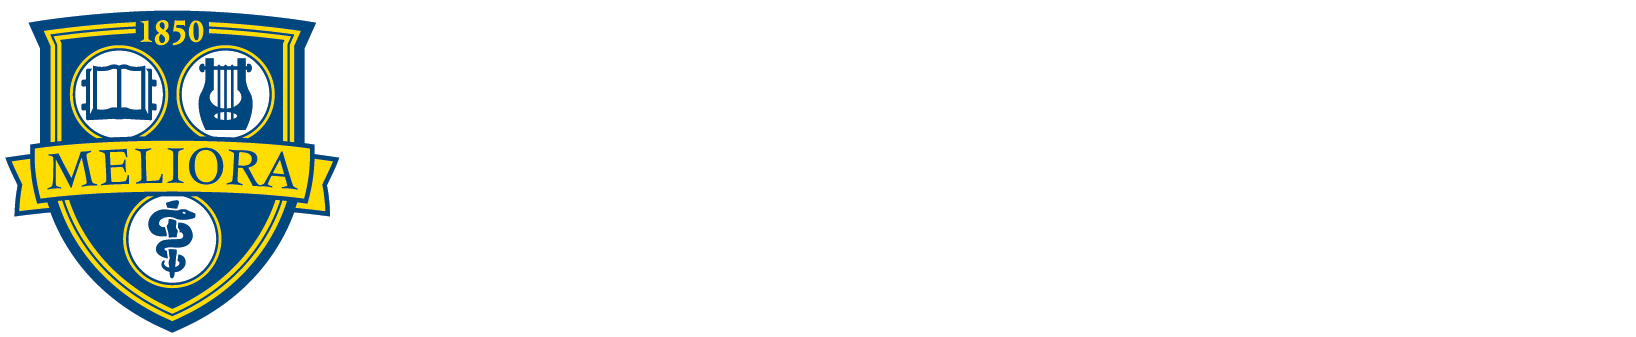 University of Rochester Home Page